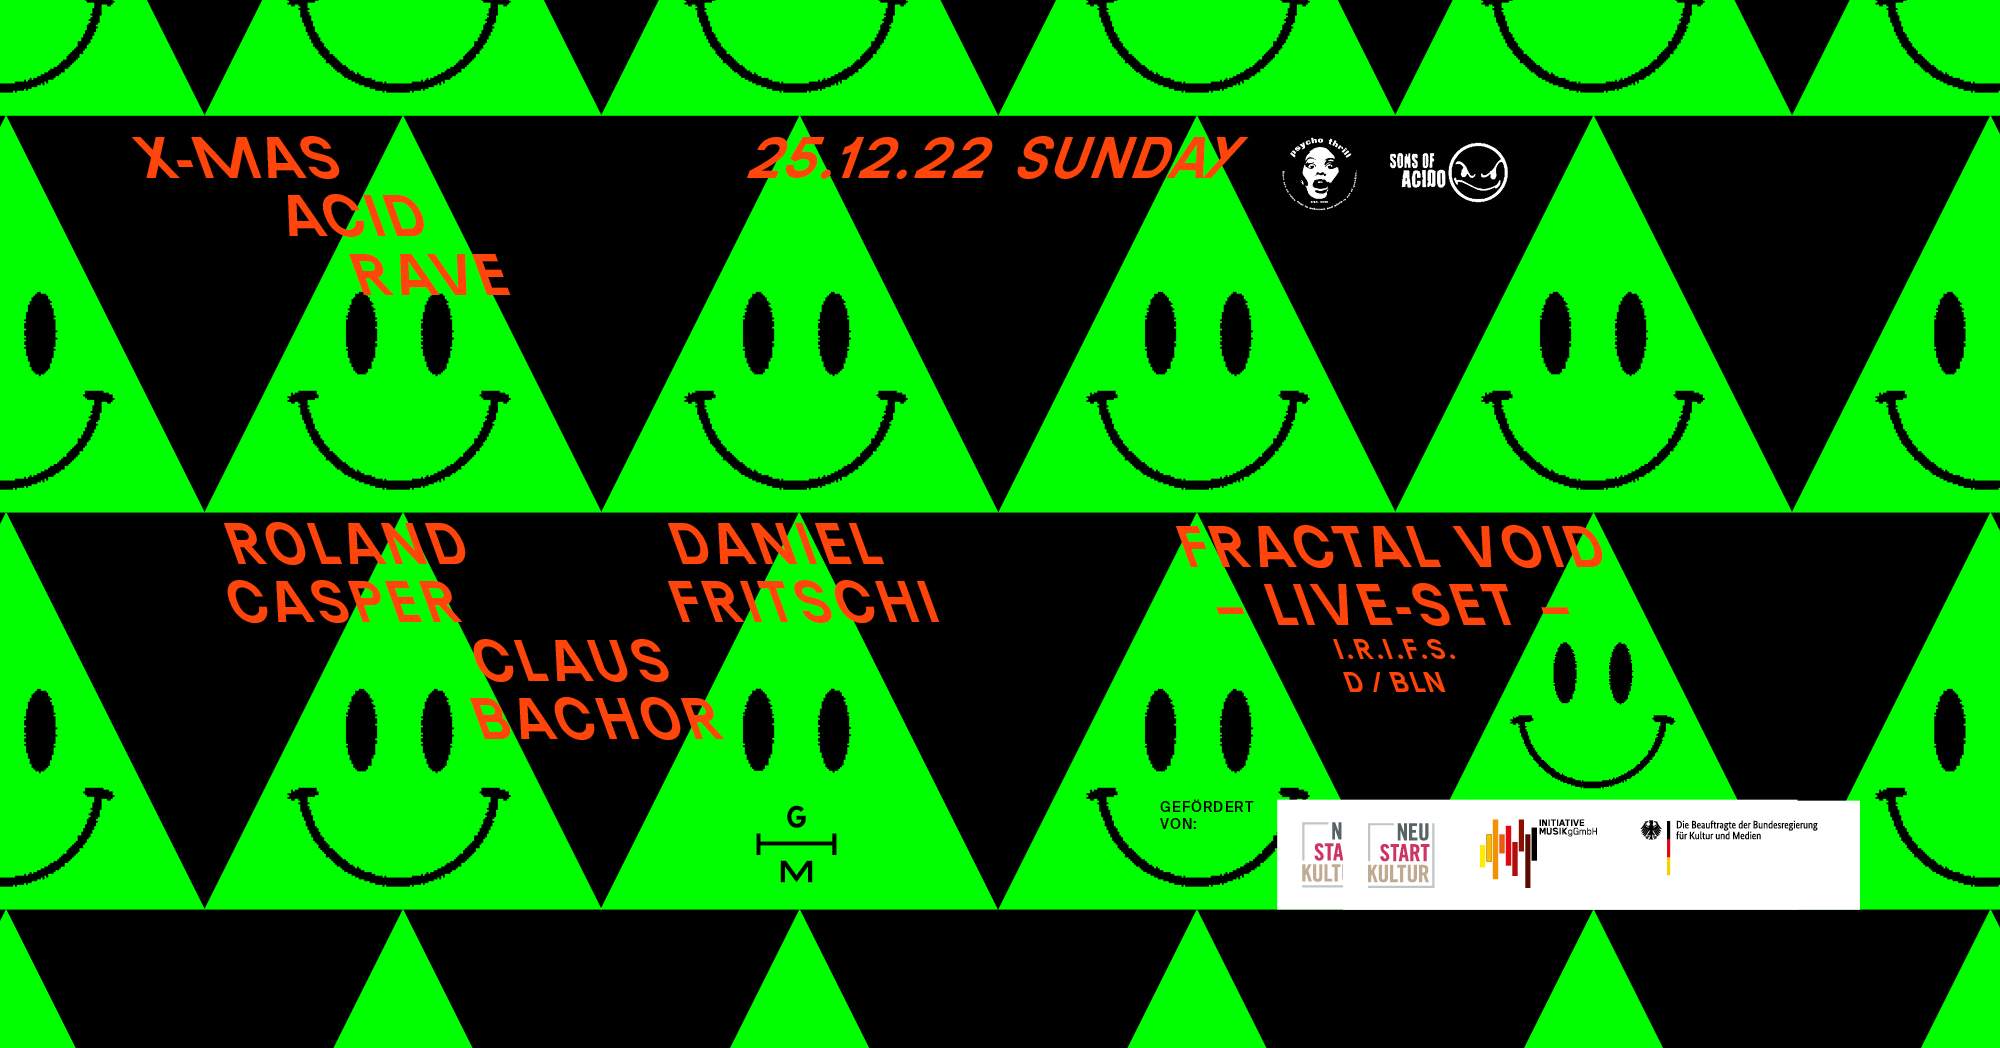 X-Mas Acid Rave with Sons Of Acido + Fractal Void_live - フライヤー表